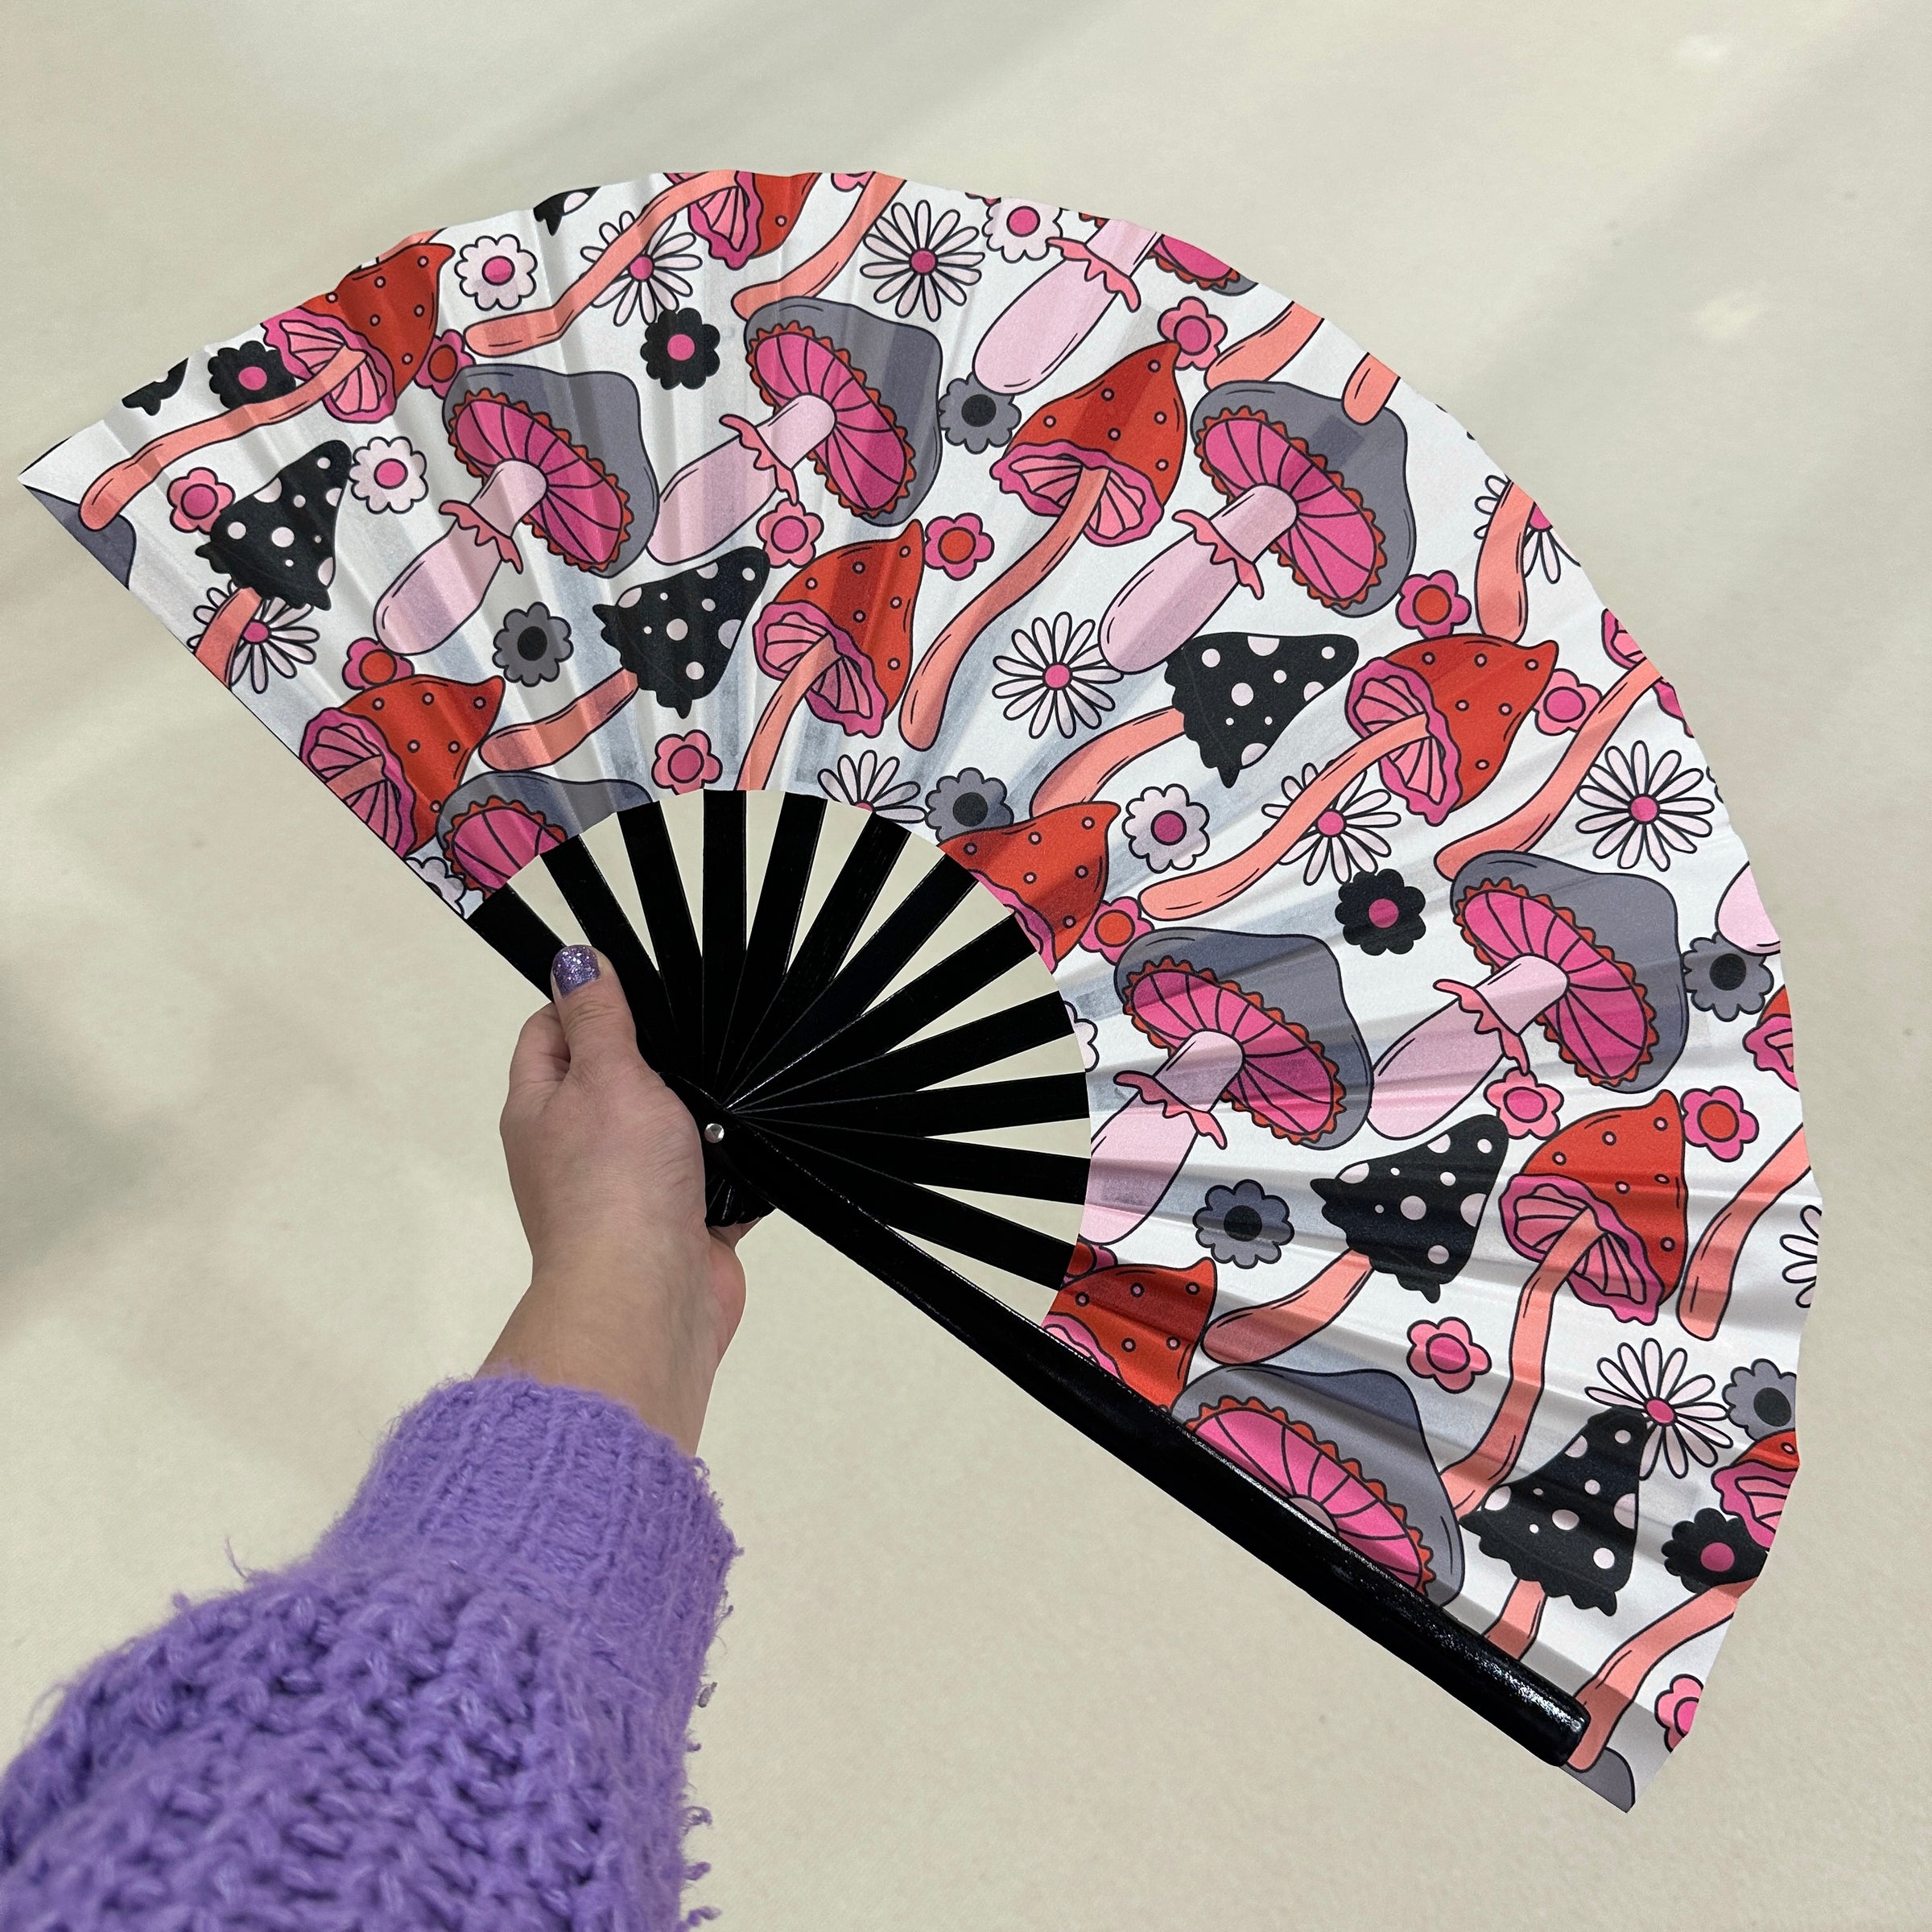 Giant Clacking Hand Fan with Red, Black & White Toadstools Print (Glows in UV!)